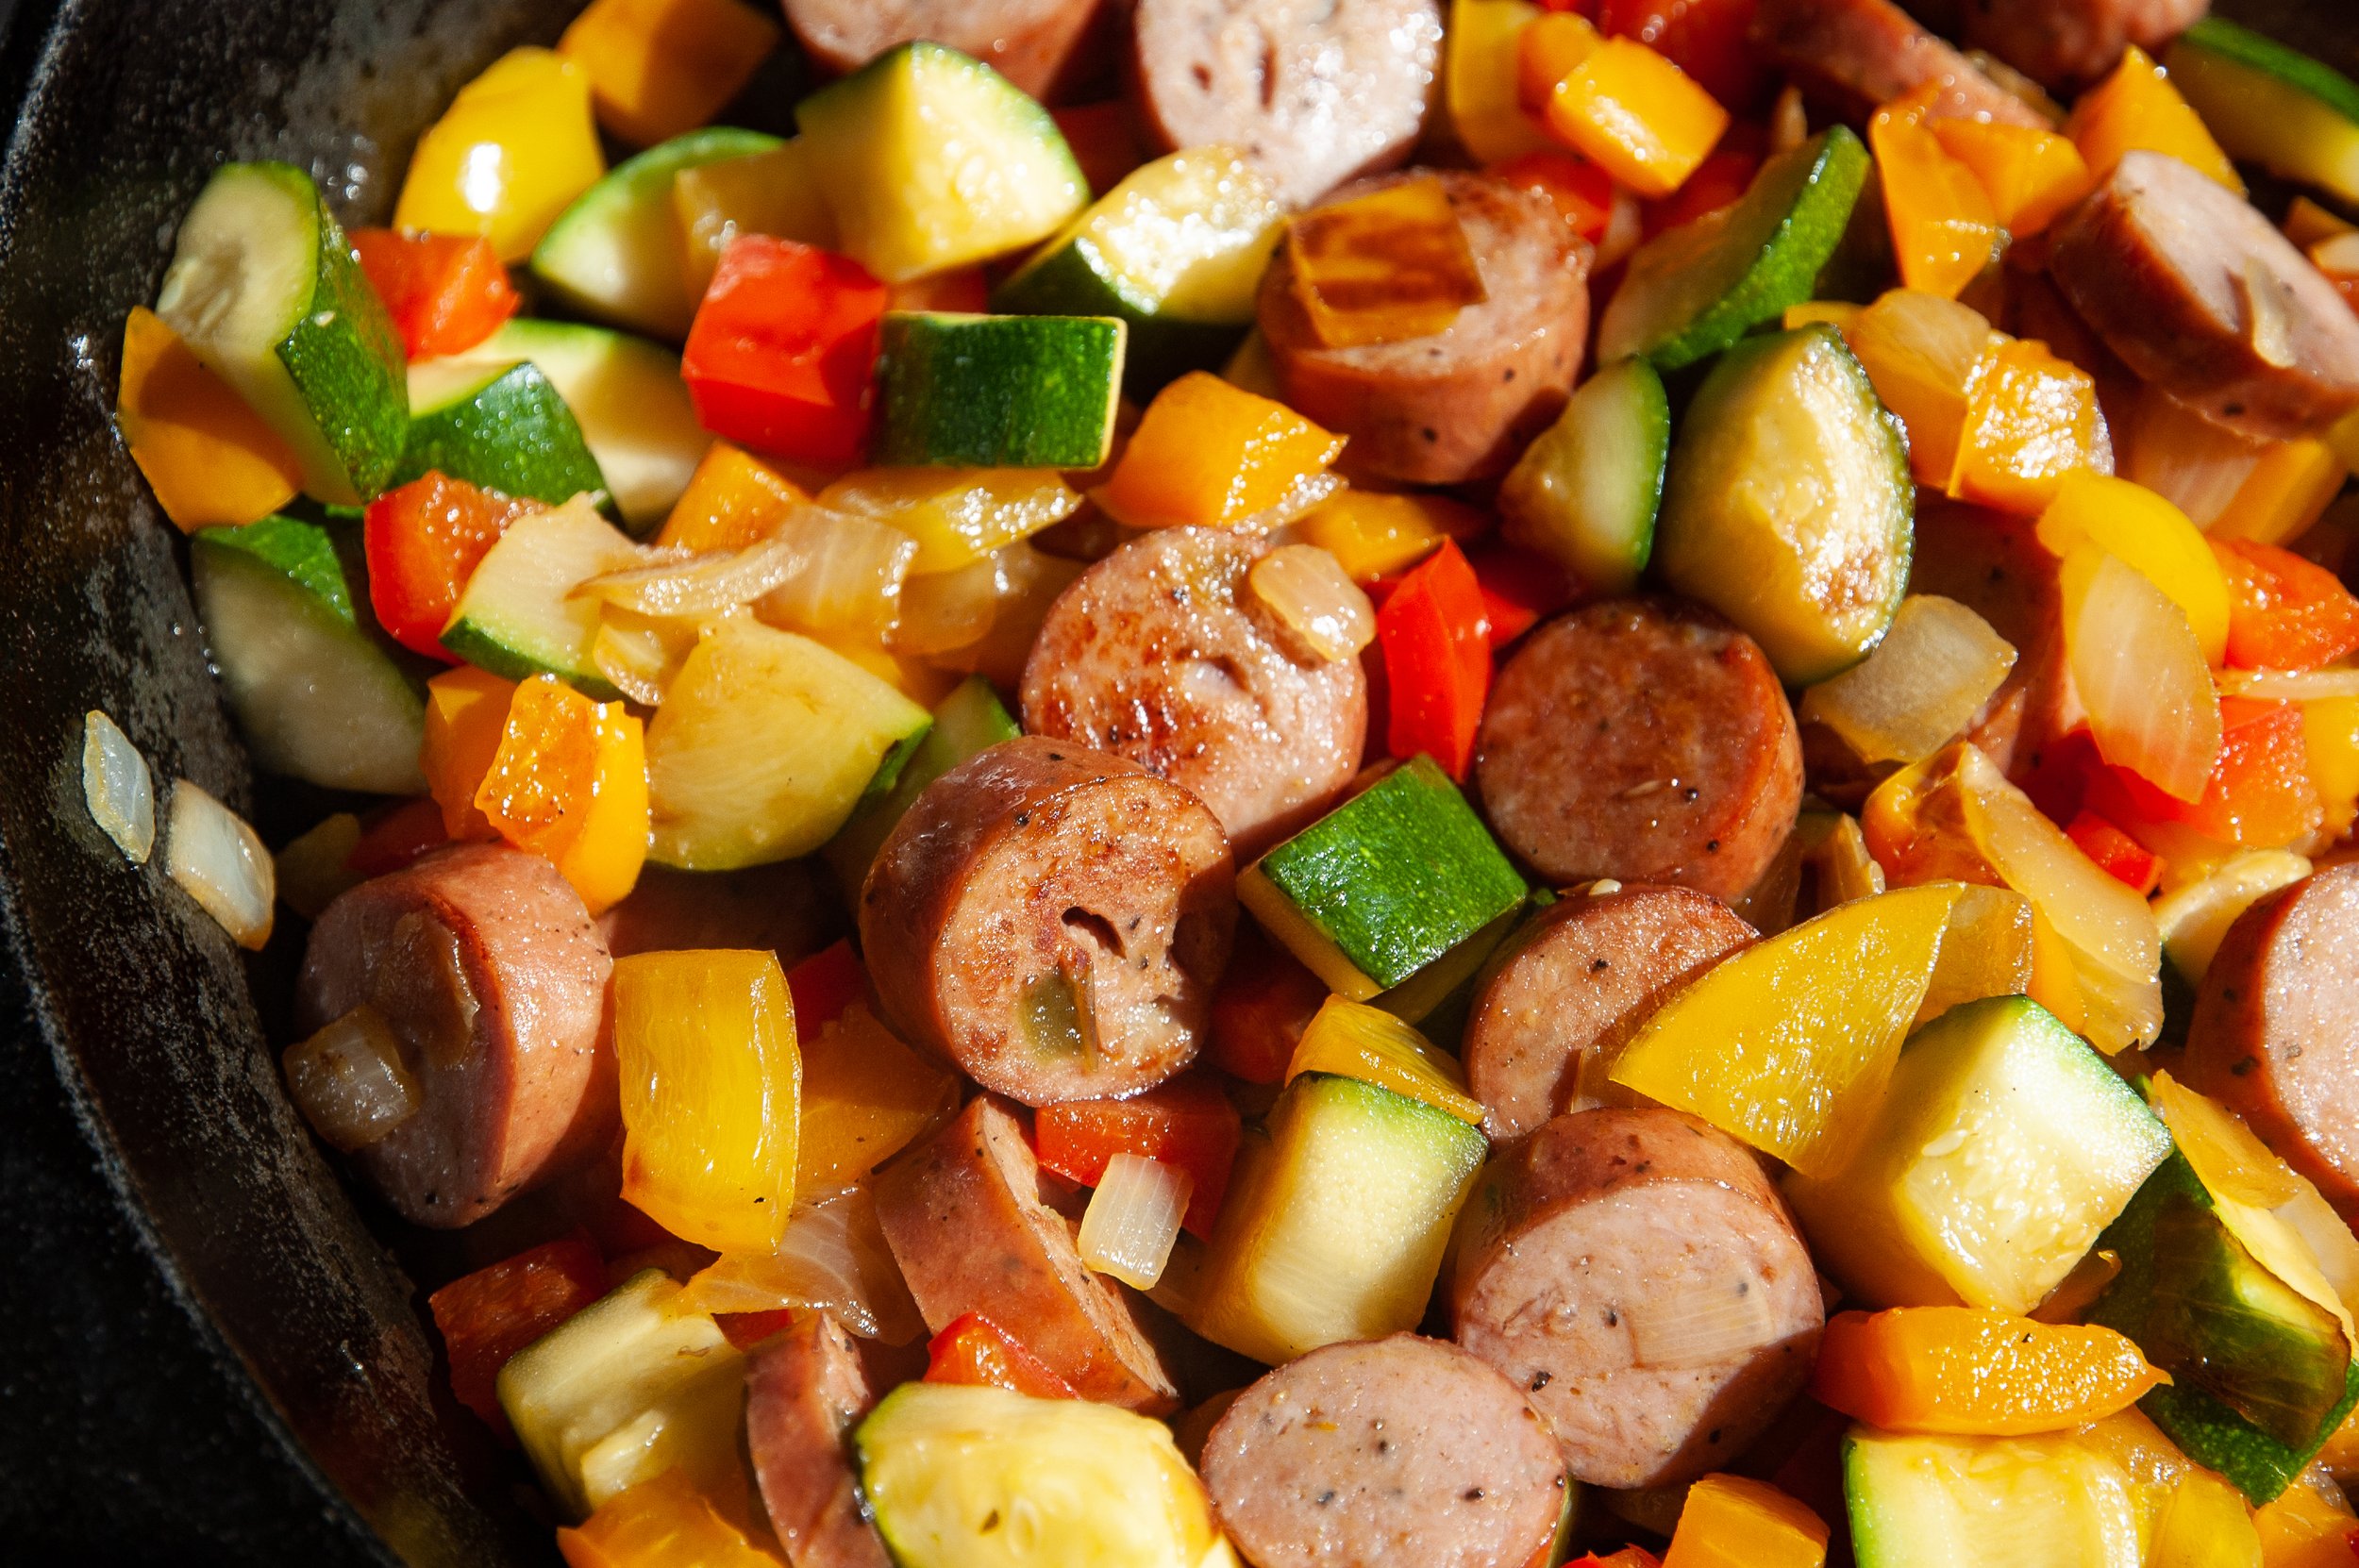 How to make a sausage and veggie skillet